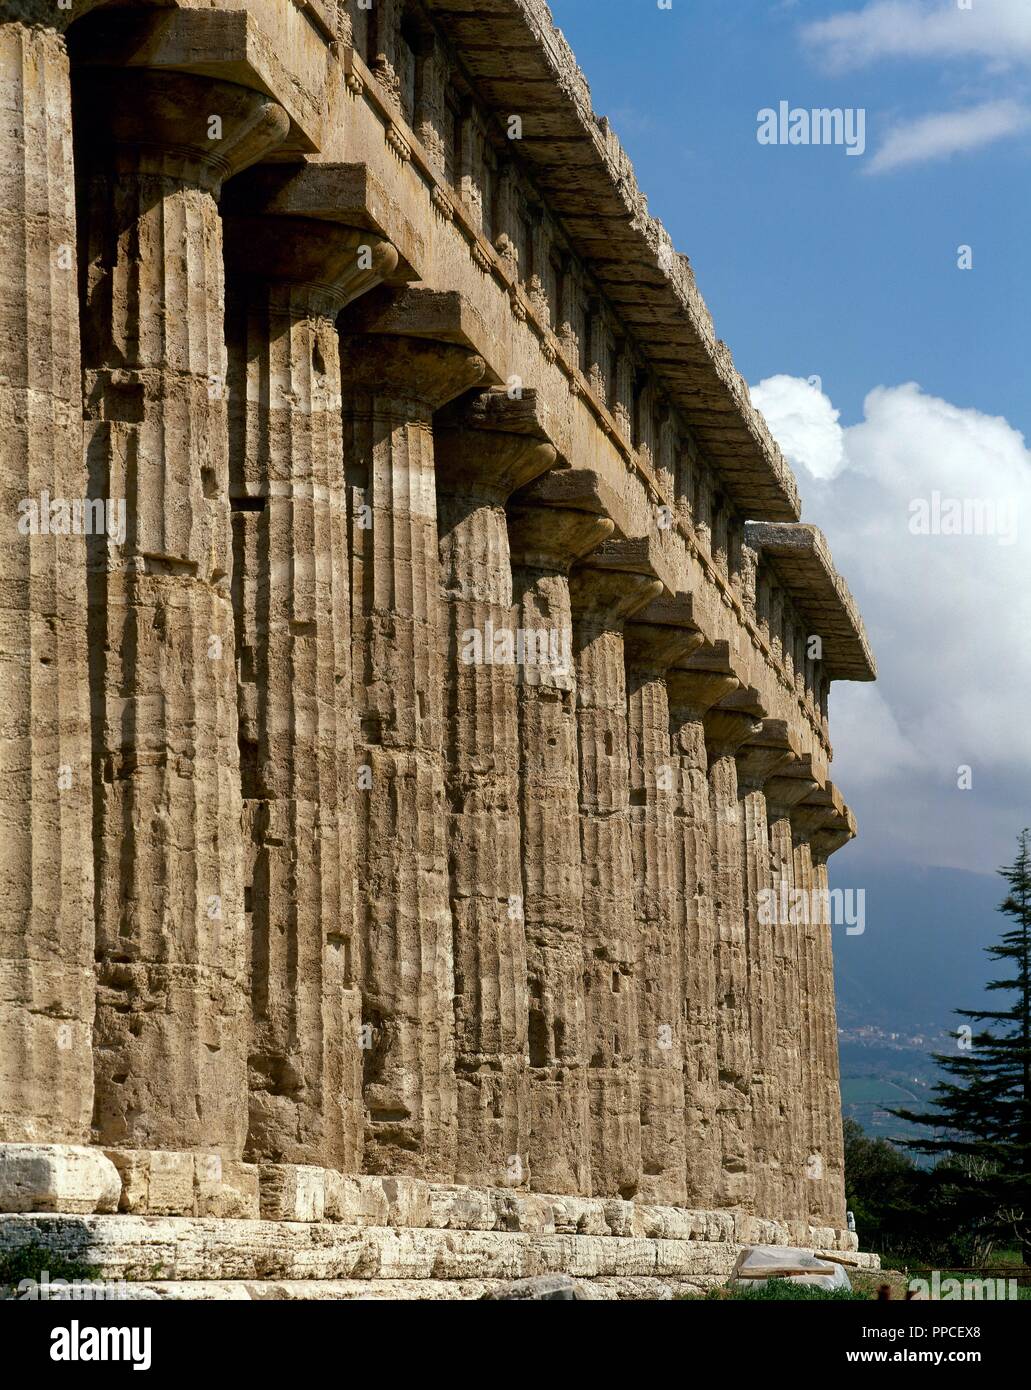 Italy. Paestum. Doric temple of Hera from about 450 BC, formerly incorrectly attributed as the Temple of Neptune (Poseidon). South of Naples. Unesco World Heritage. Stock Photo